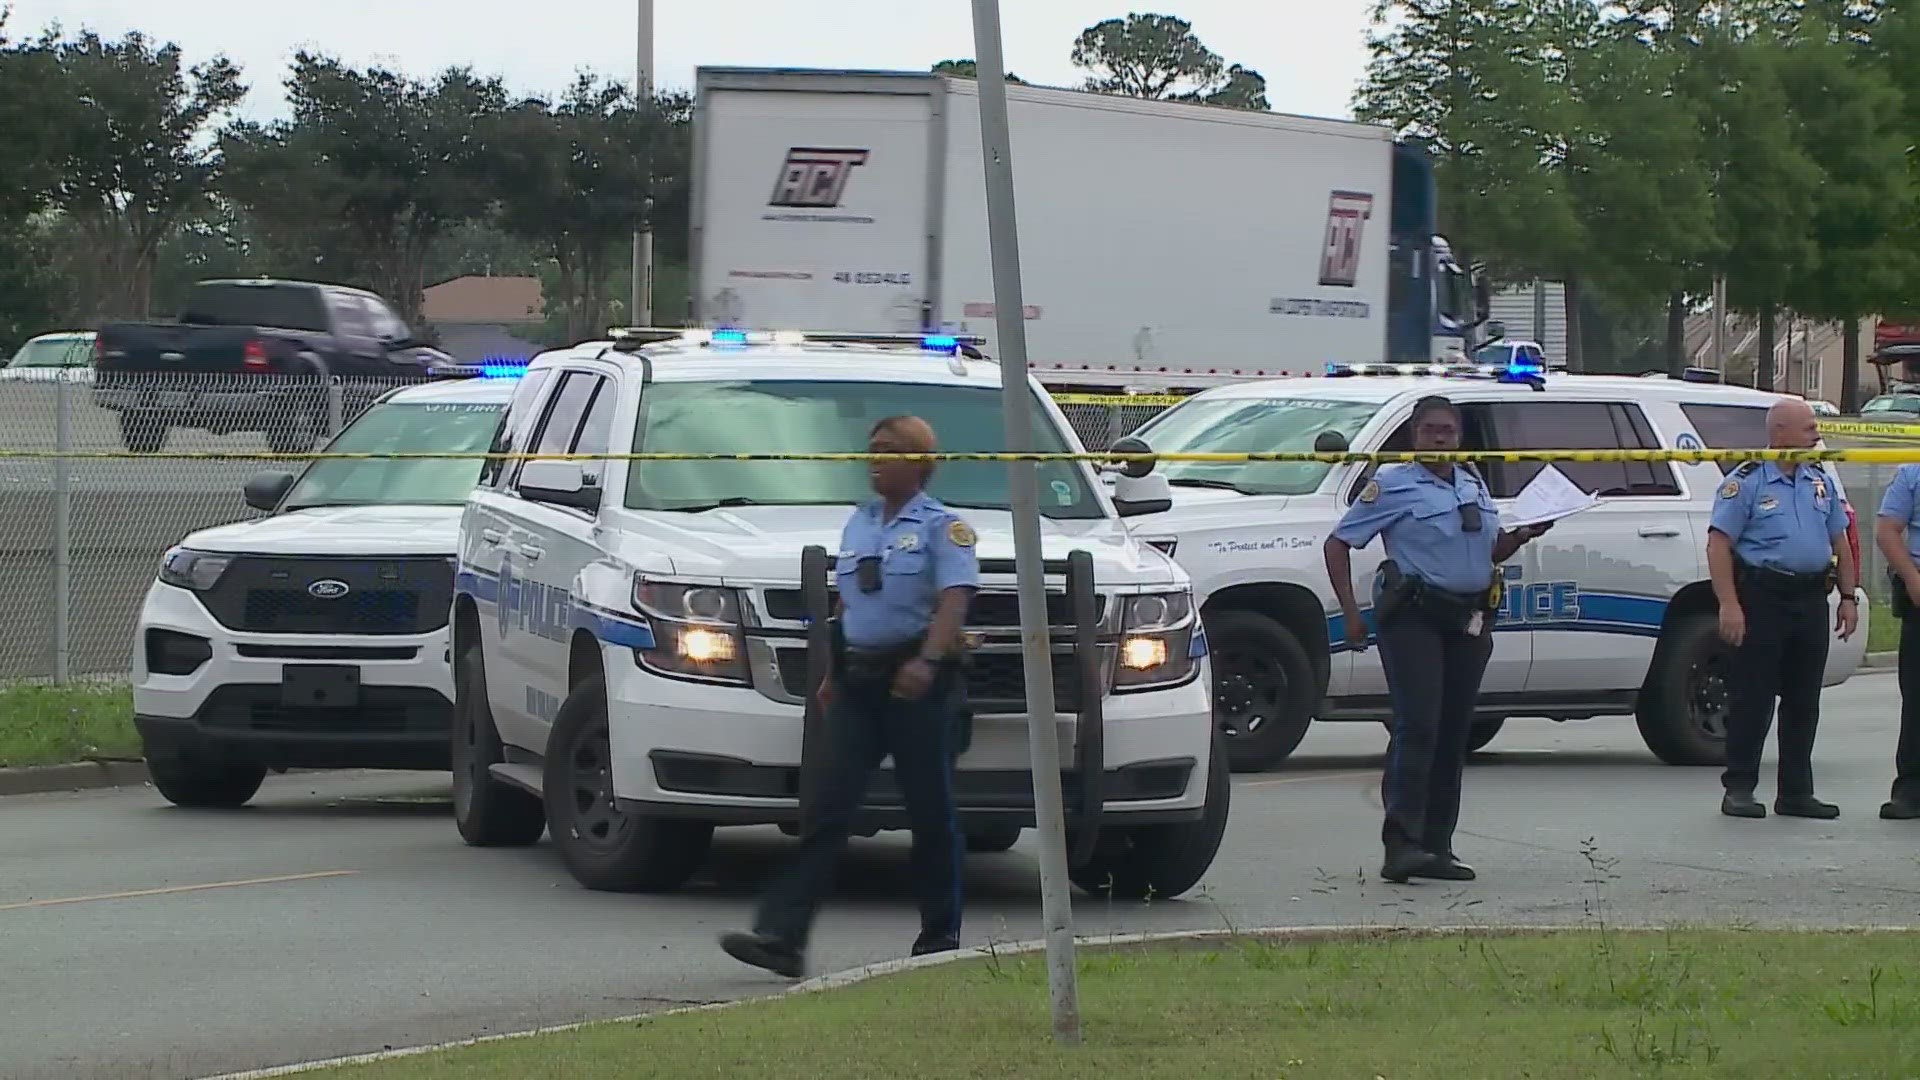 The shooting was reported around 9 a.m. near the intersection of South I-10 Service Road and Mayo Road.